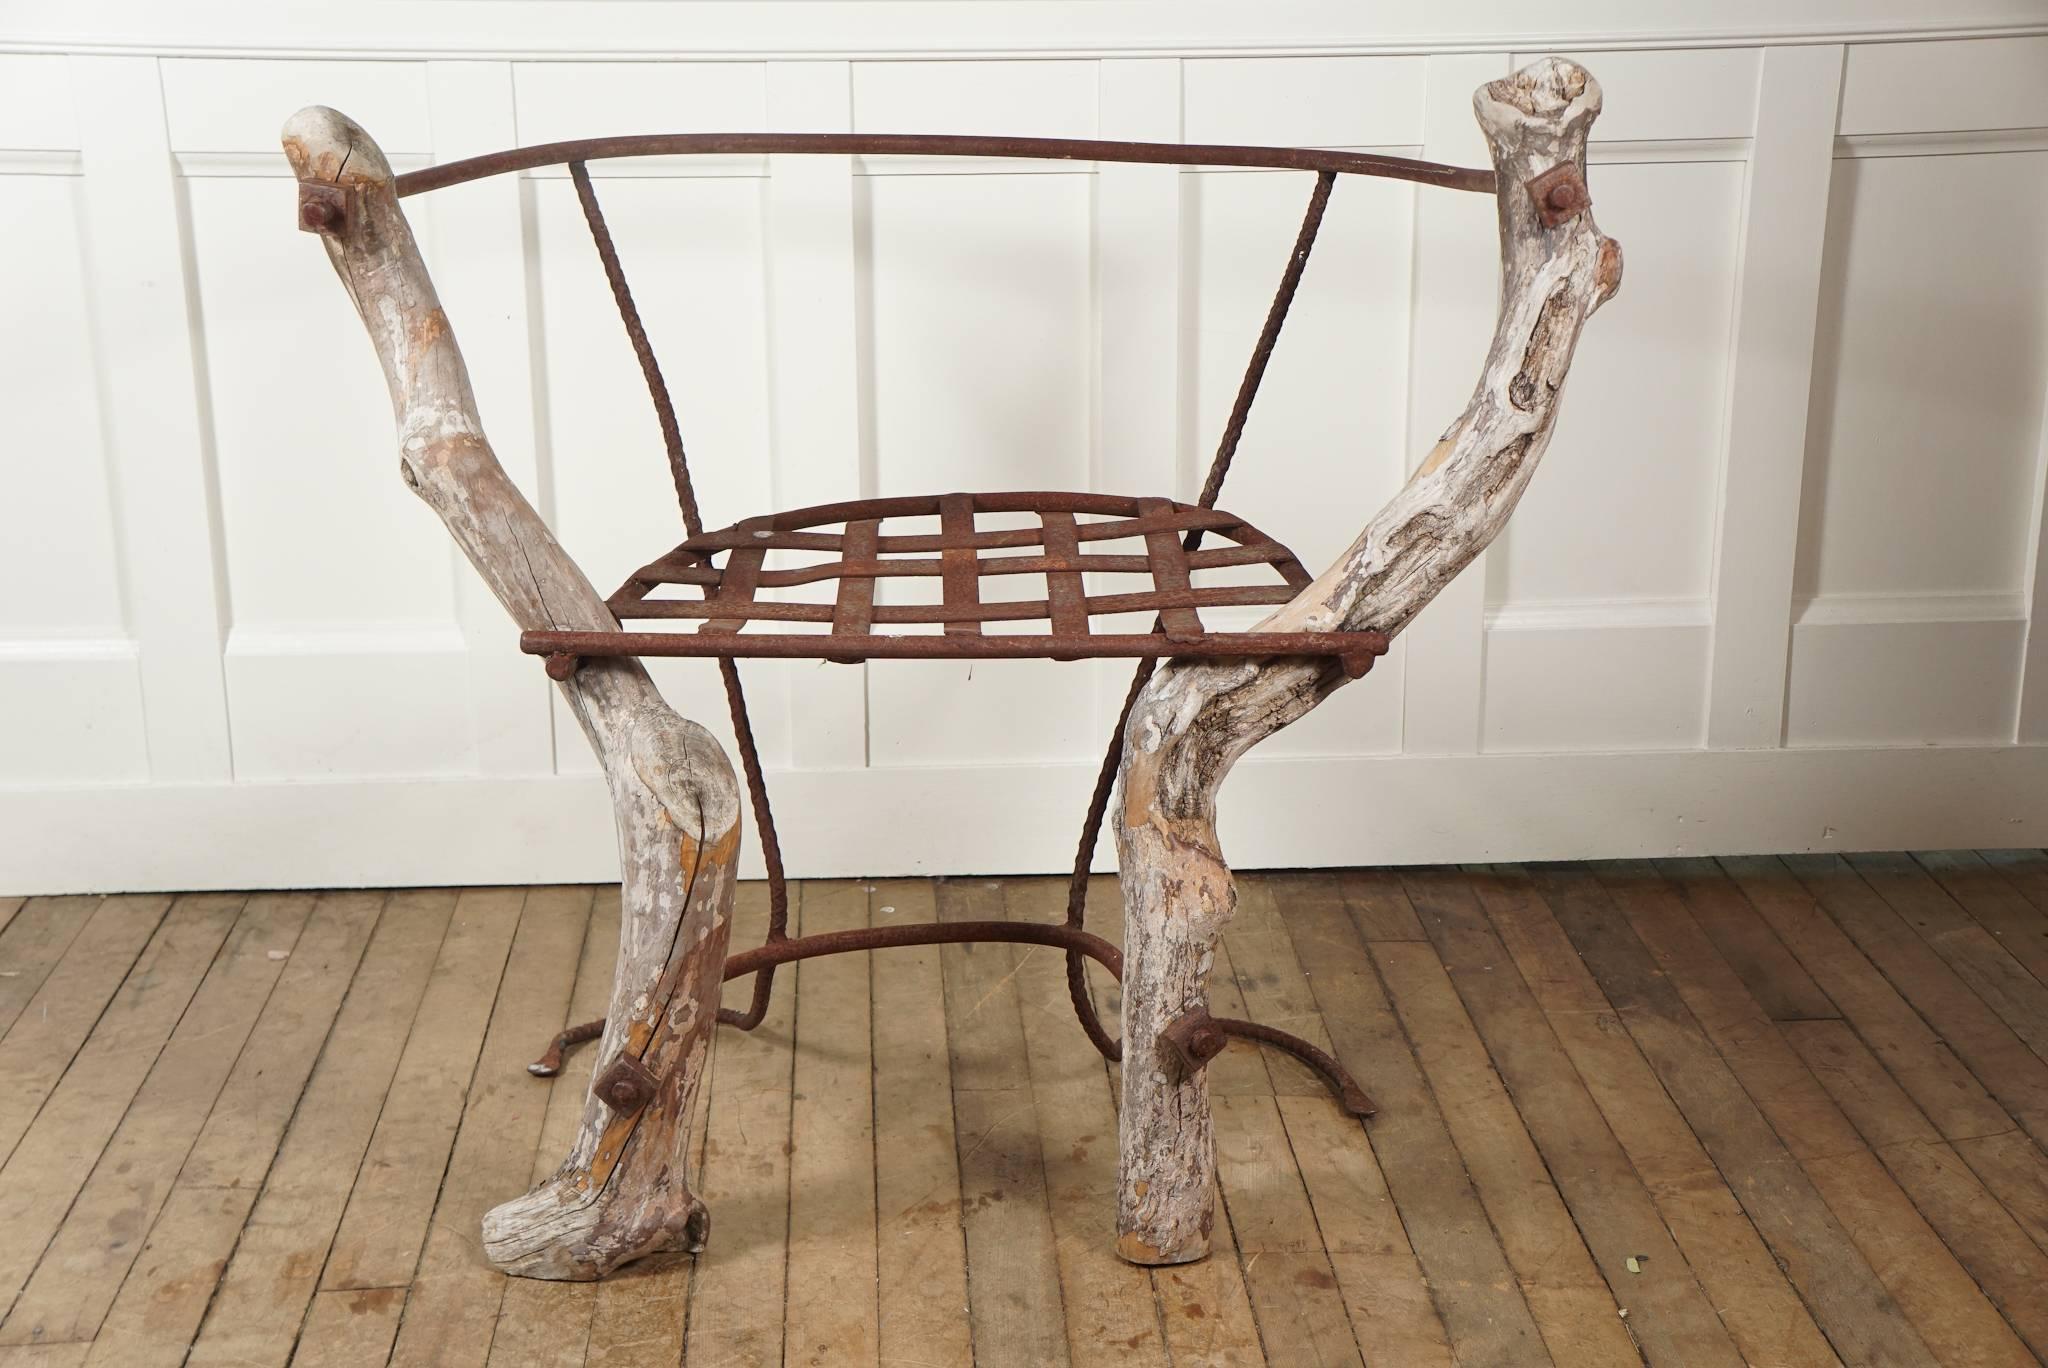 Organic chair designed with gnarled wood branches woven-wrought metal seat, metal rod back and legs ending in a flourish all attached with large square nuts.